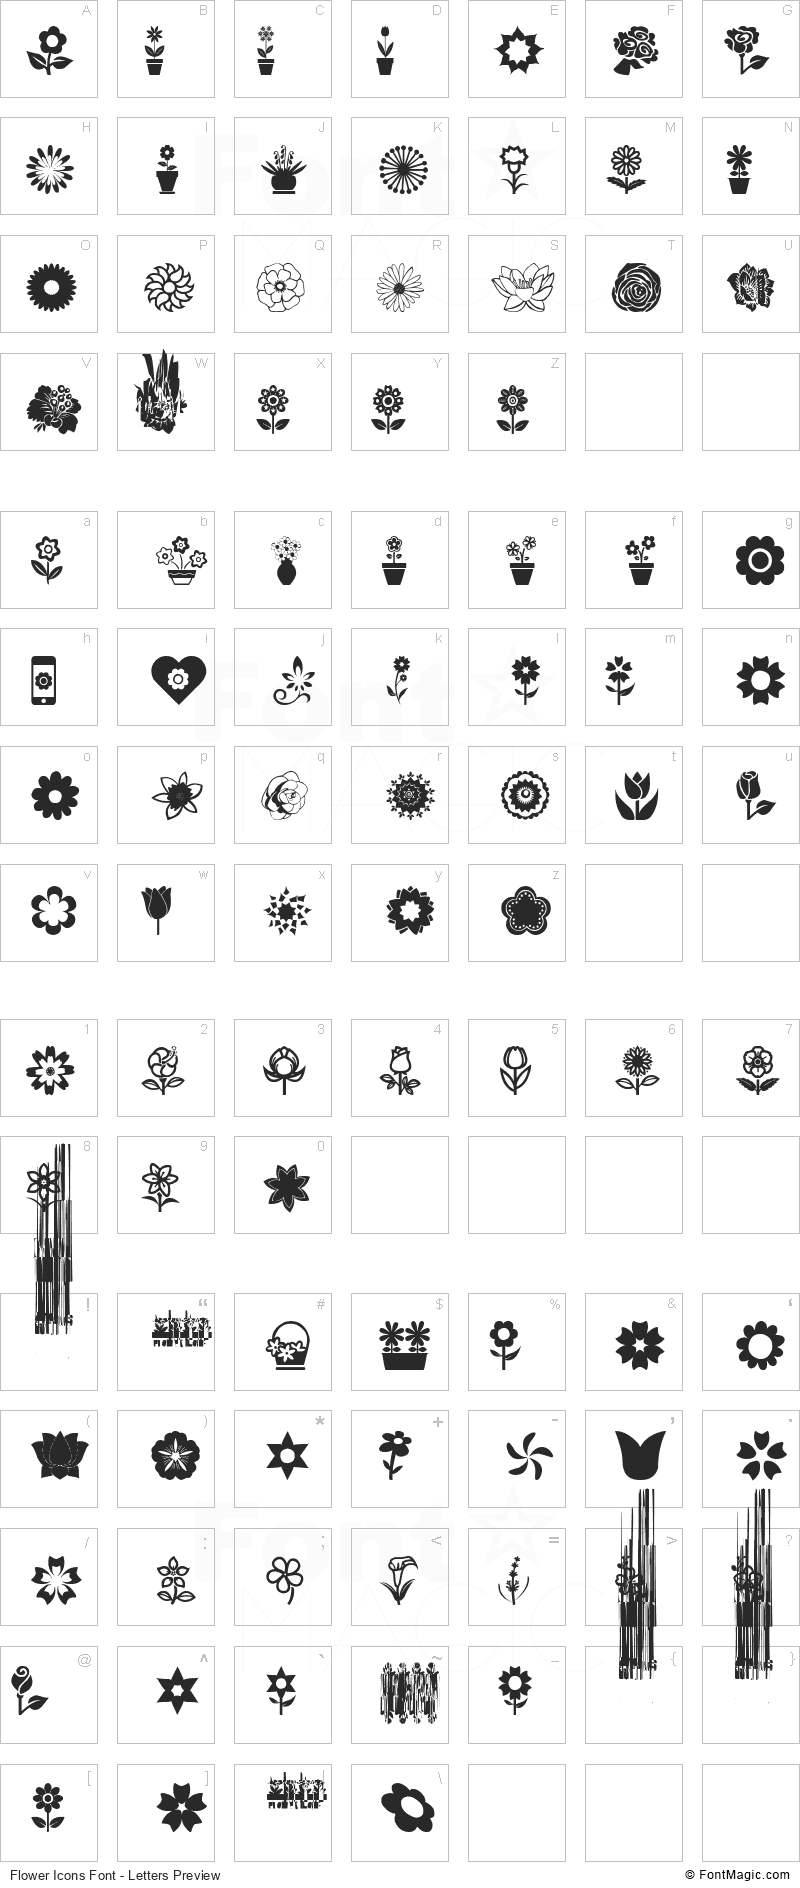 Flower Icons Font - All Latters Preview Chart